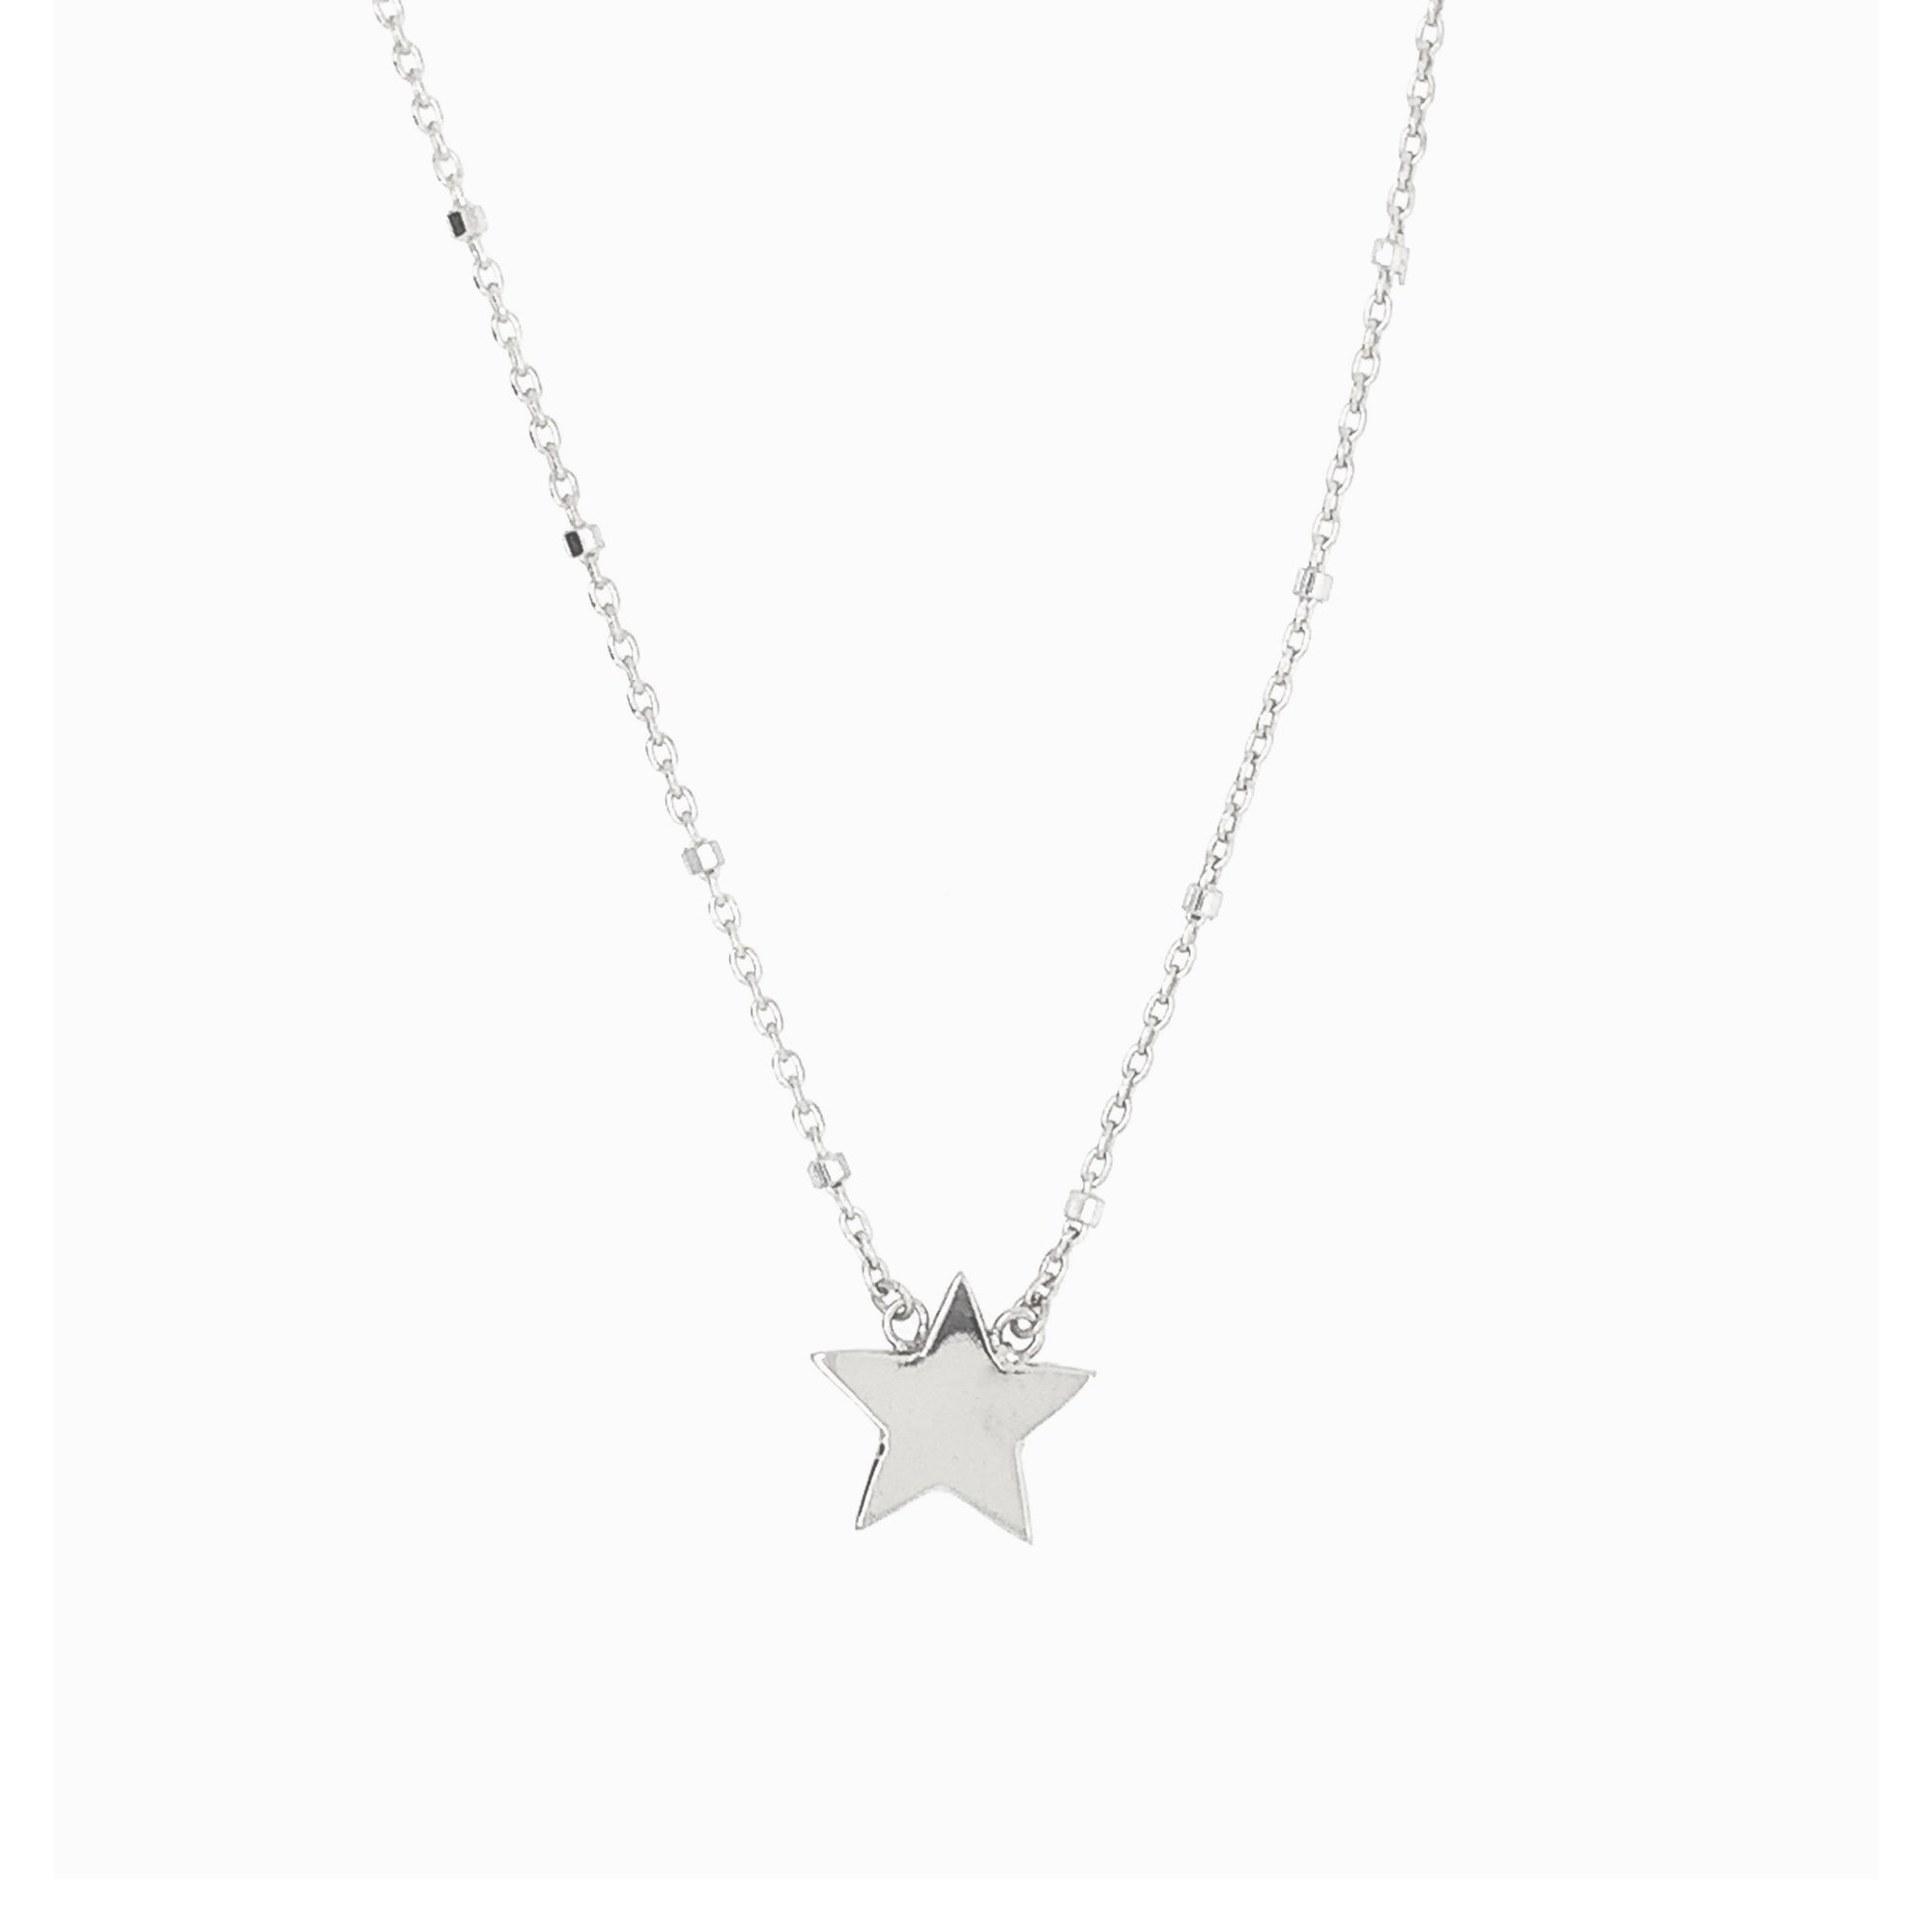 14k white gold LAHA star necklace